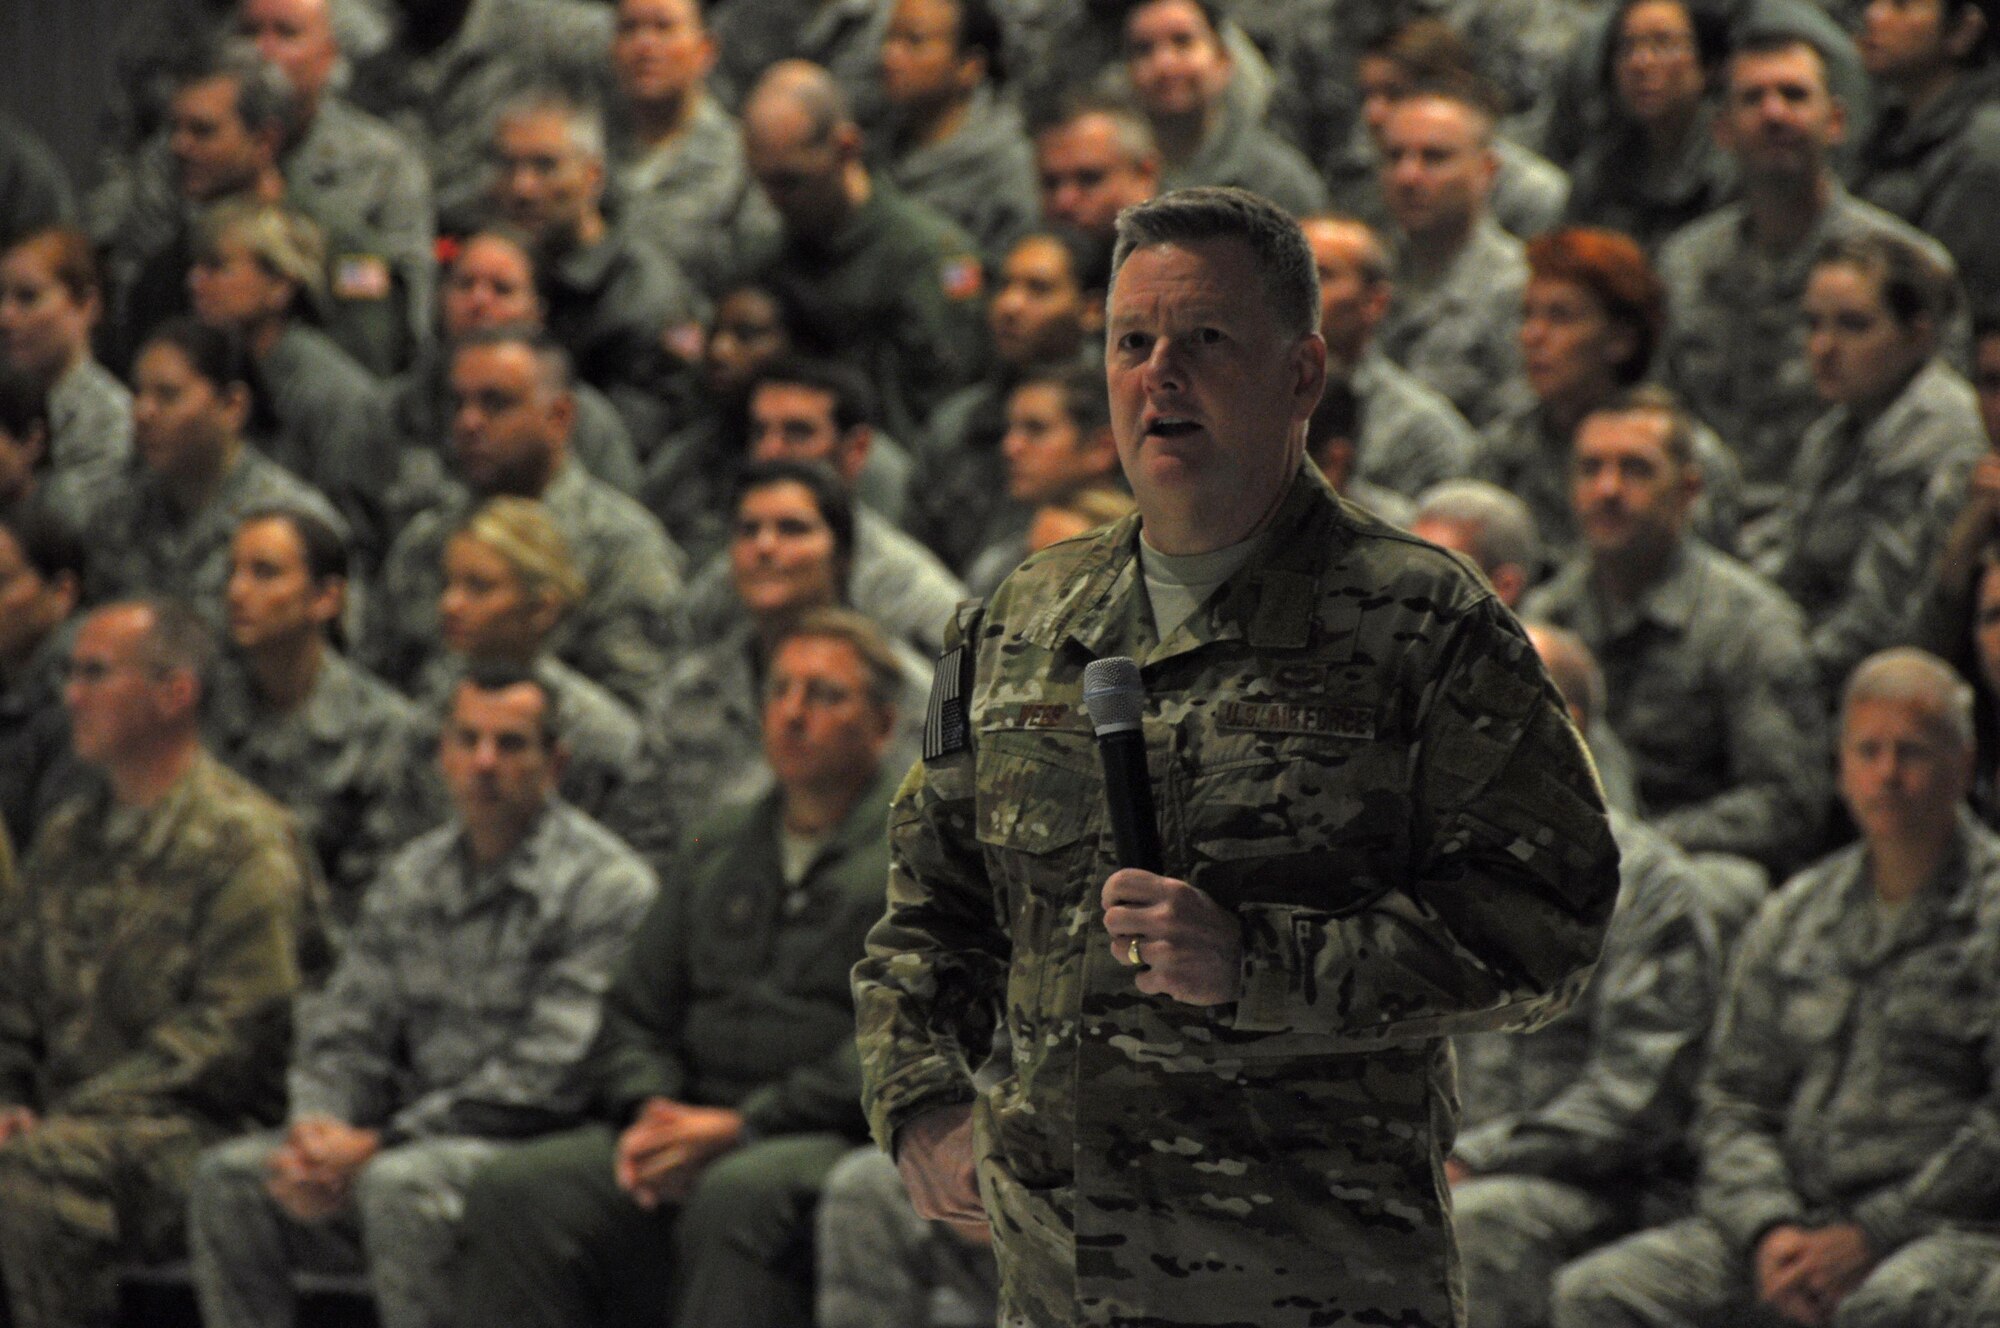 Lt. Gen. Brad Webb, commander of Air Force Special Operations Command, shares his vision and priorities for the future with Citizen Air Commandos at Duke Field, Fla., Feb. 4, 2017. Webb spoke to the Reservists and visited with senior leaders to ensure members assigned here understand how important the Wing’s mission is to AFSOC’s global operations. (U.S. Air Force photo/Dan Neely)
